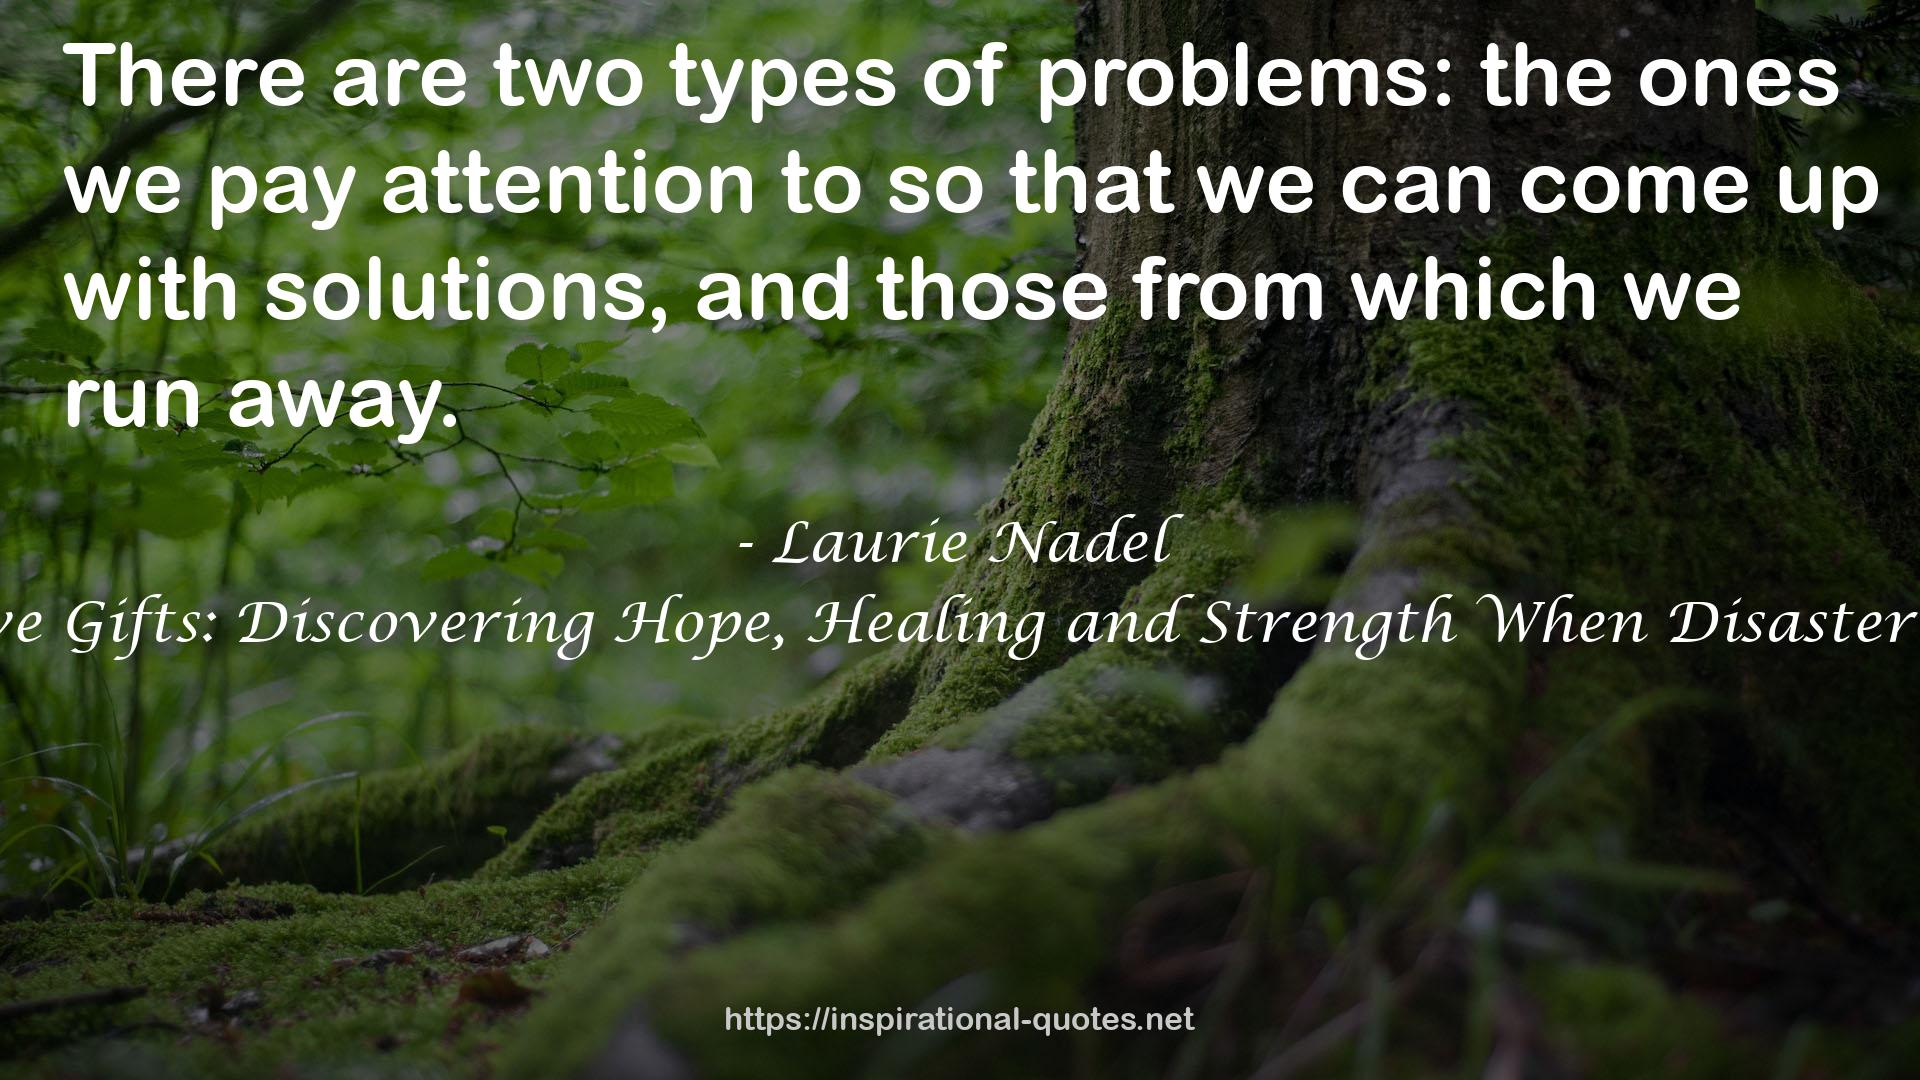 The Five Gifts: Discovering Hope, Healing and Strength When Disaster Strikes QUOTES